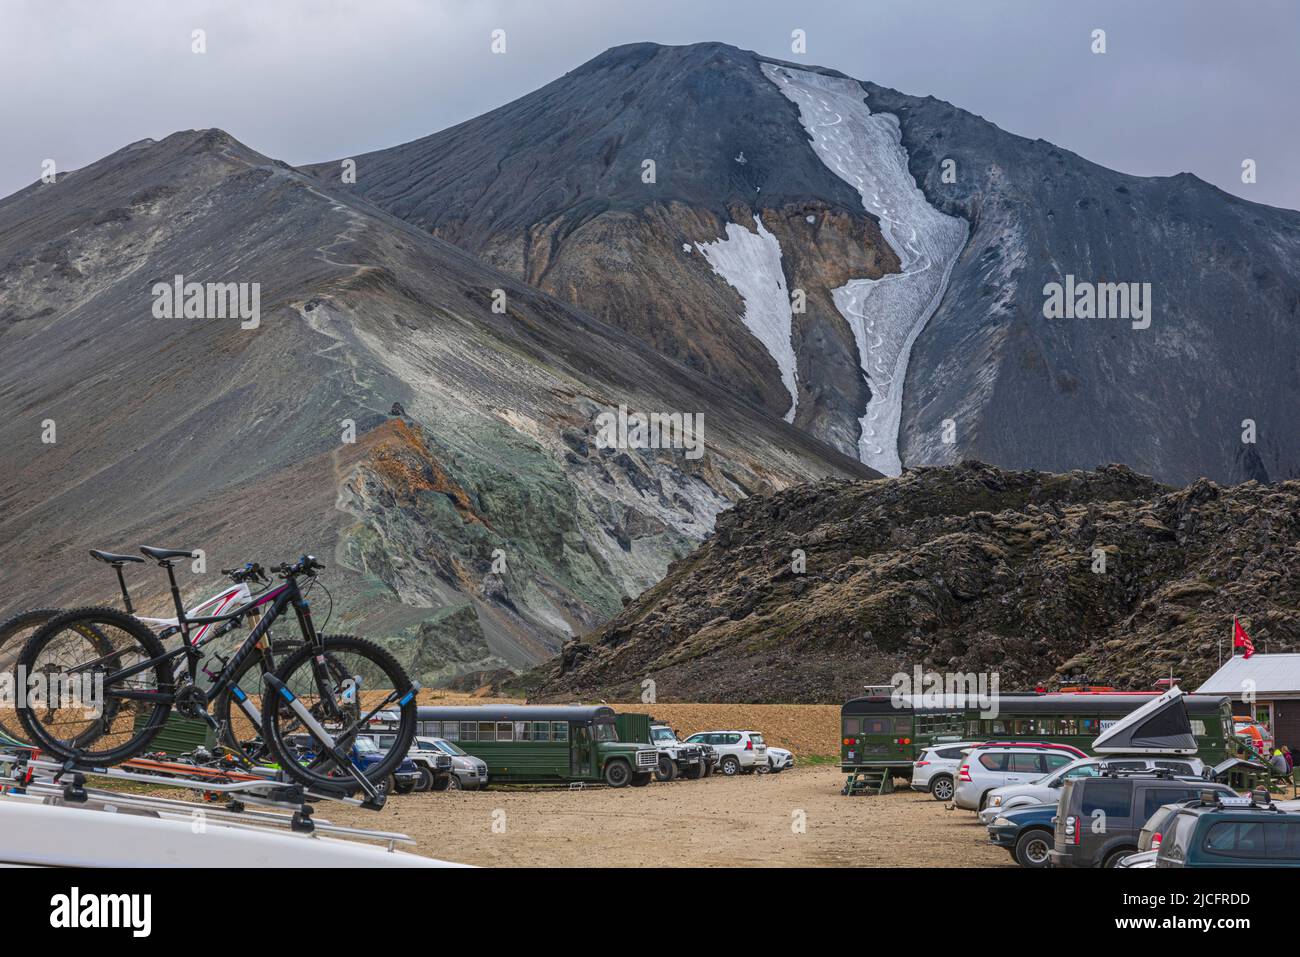 Laugavegur hiking trail is the most famous multi-day trekking tour in Iceland. Landscape shot from the area around Landmannalaugar, starting point of the long-distance hiking trail in the highlands of Iceland. Mountain bikes on a car roof at the parking lot. Stock Photo